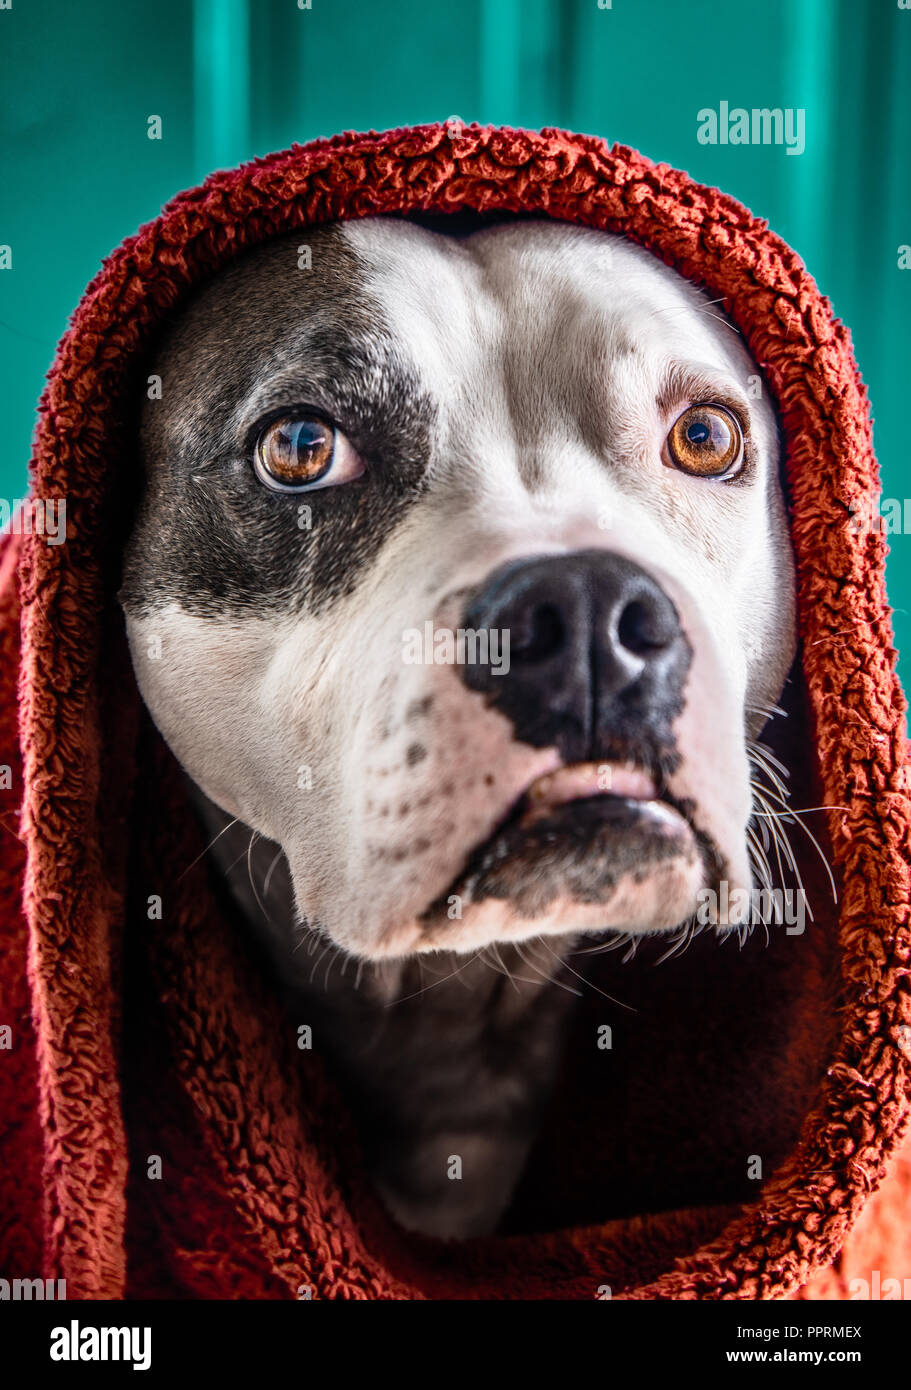 A staffordshire terrier pitbull dog poses with a blanket wrapped around his head like the shawl in the famous Steve McCurry photograph Afghan Girl Stock Photo